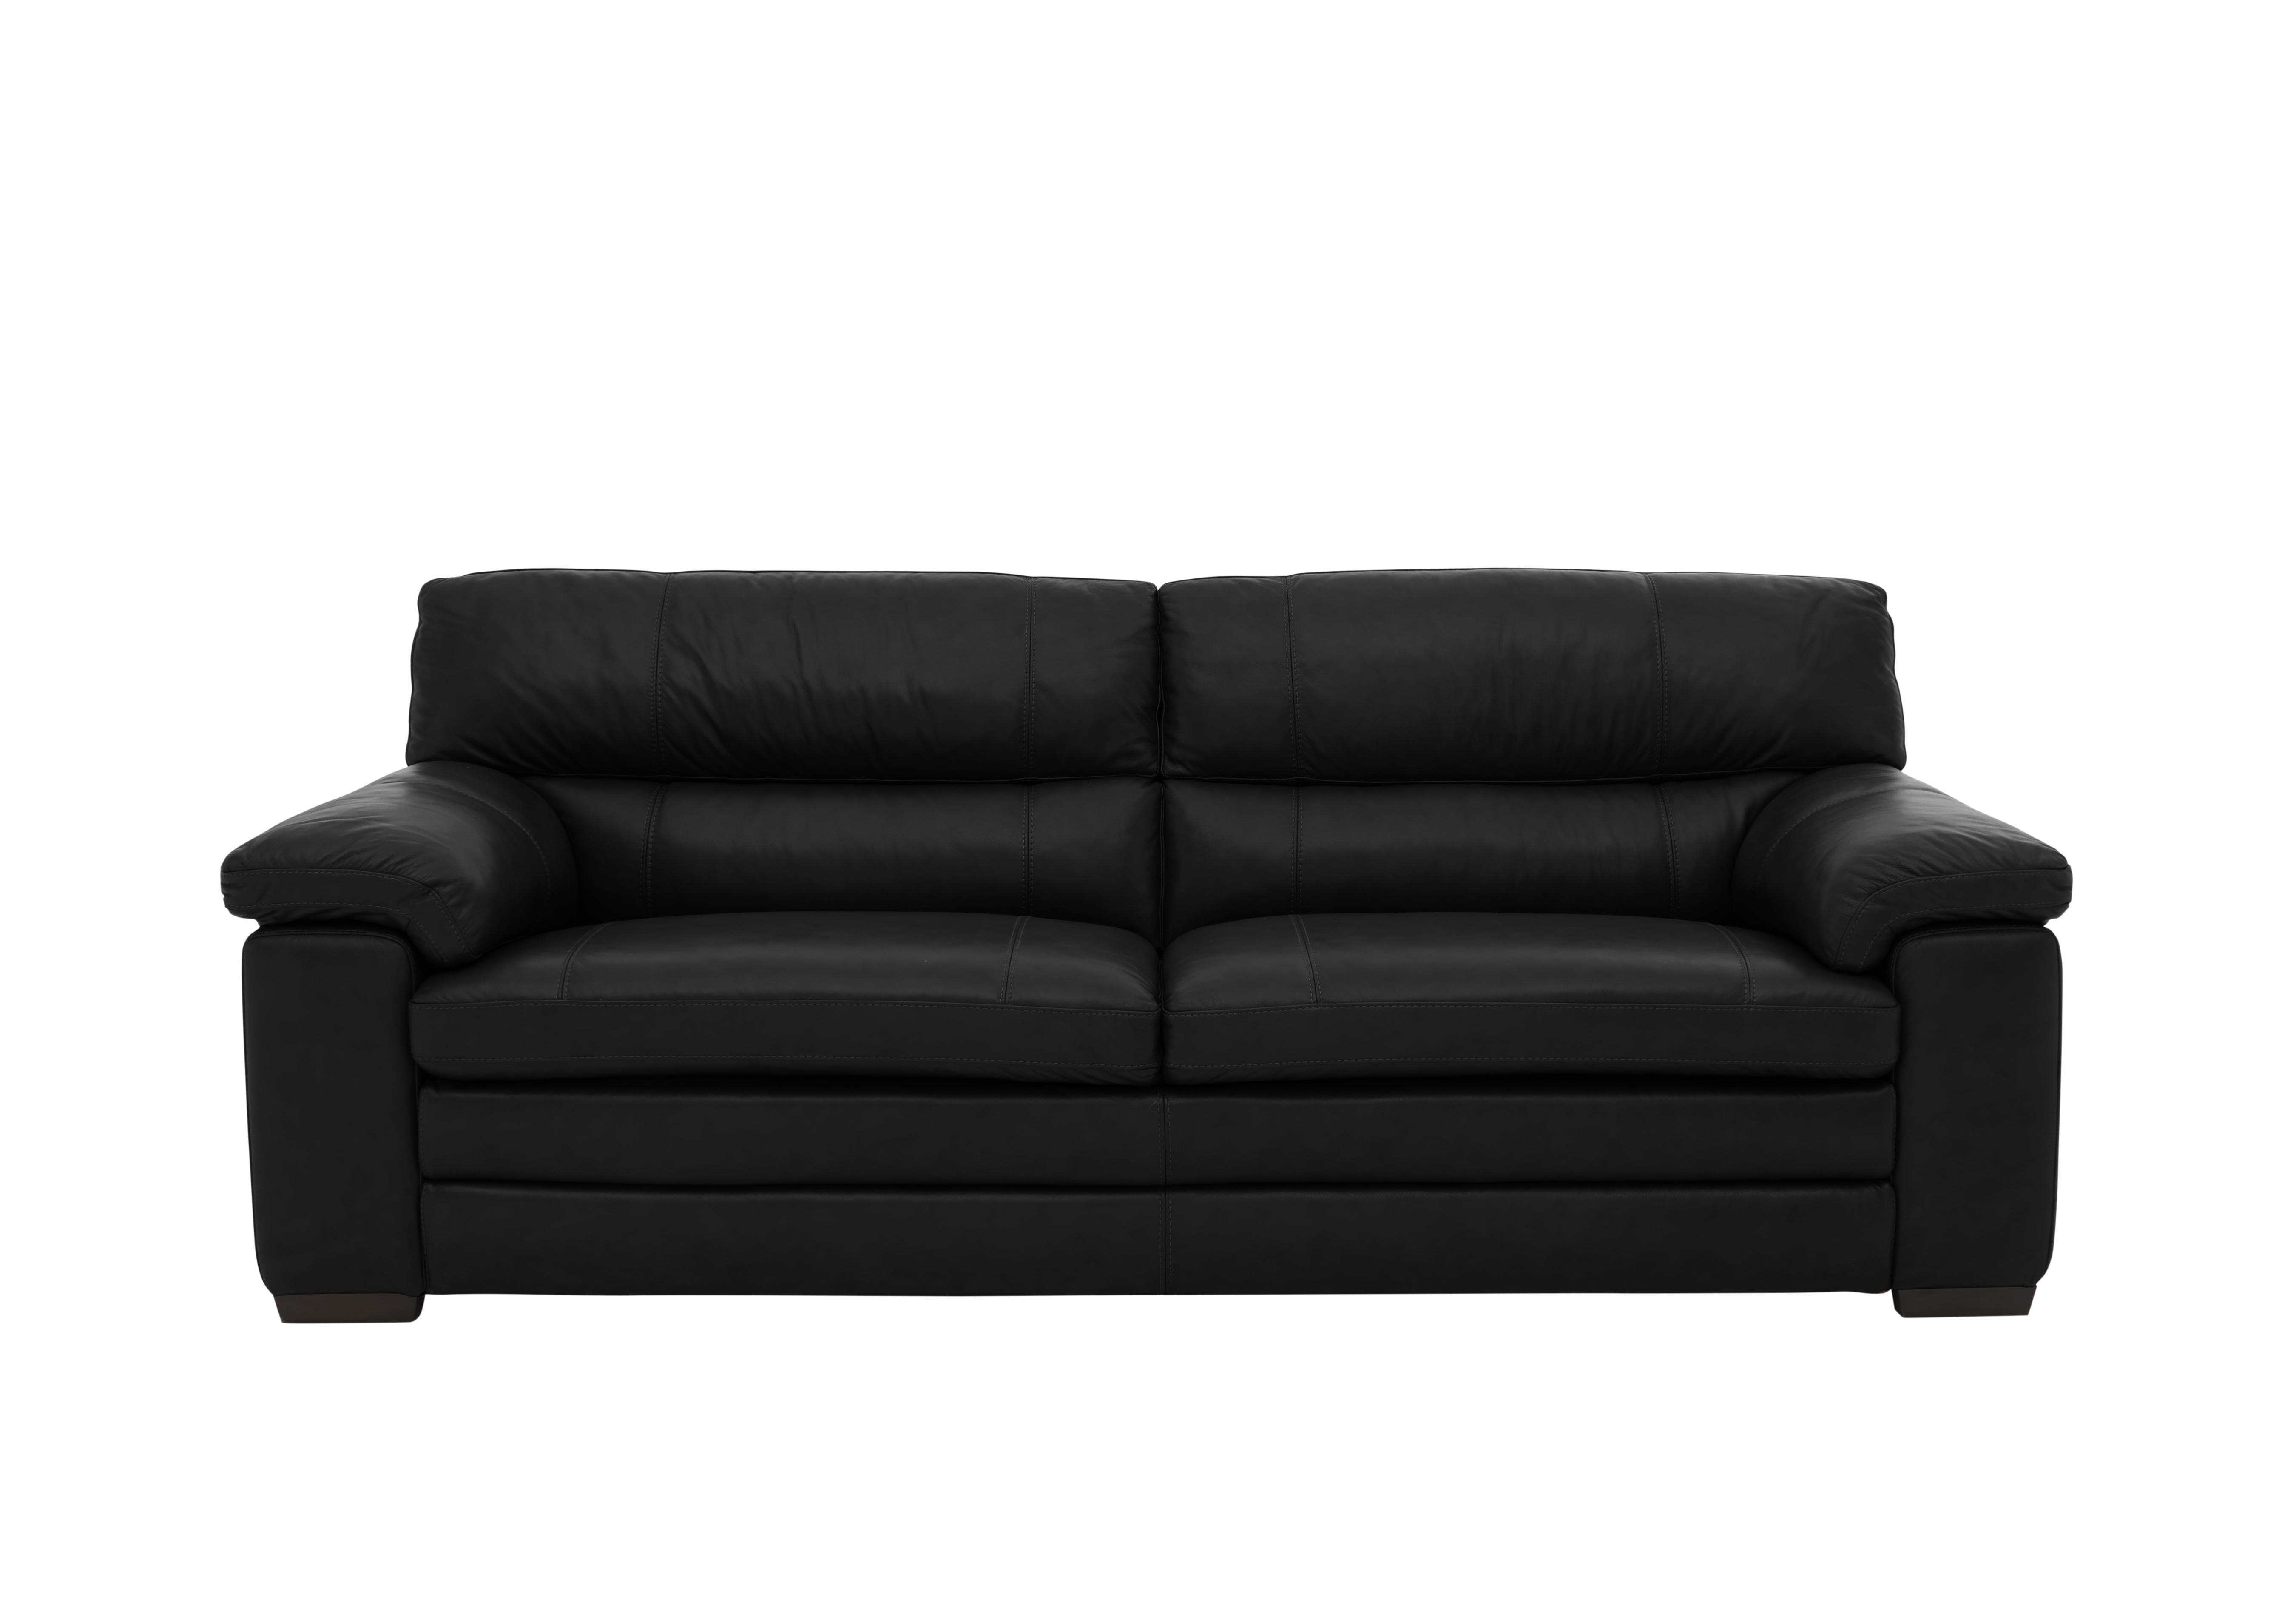 Cozee 3 Seater Pure Premium Leather Sofa in Bv-3500 Classic Black on Furniture Village